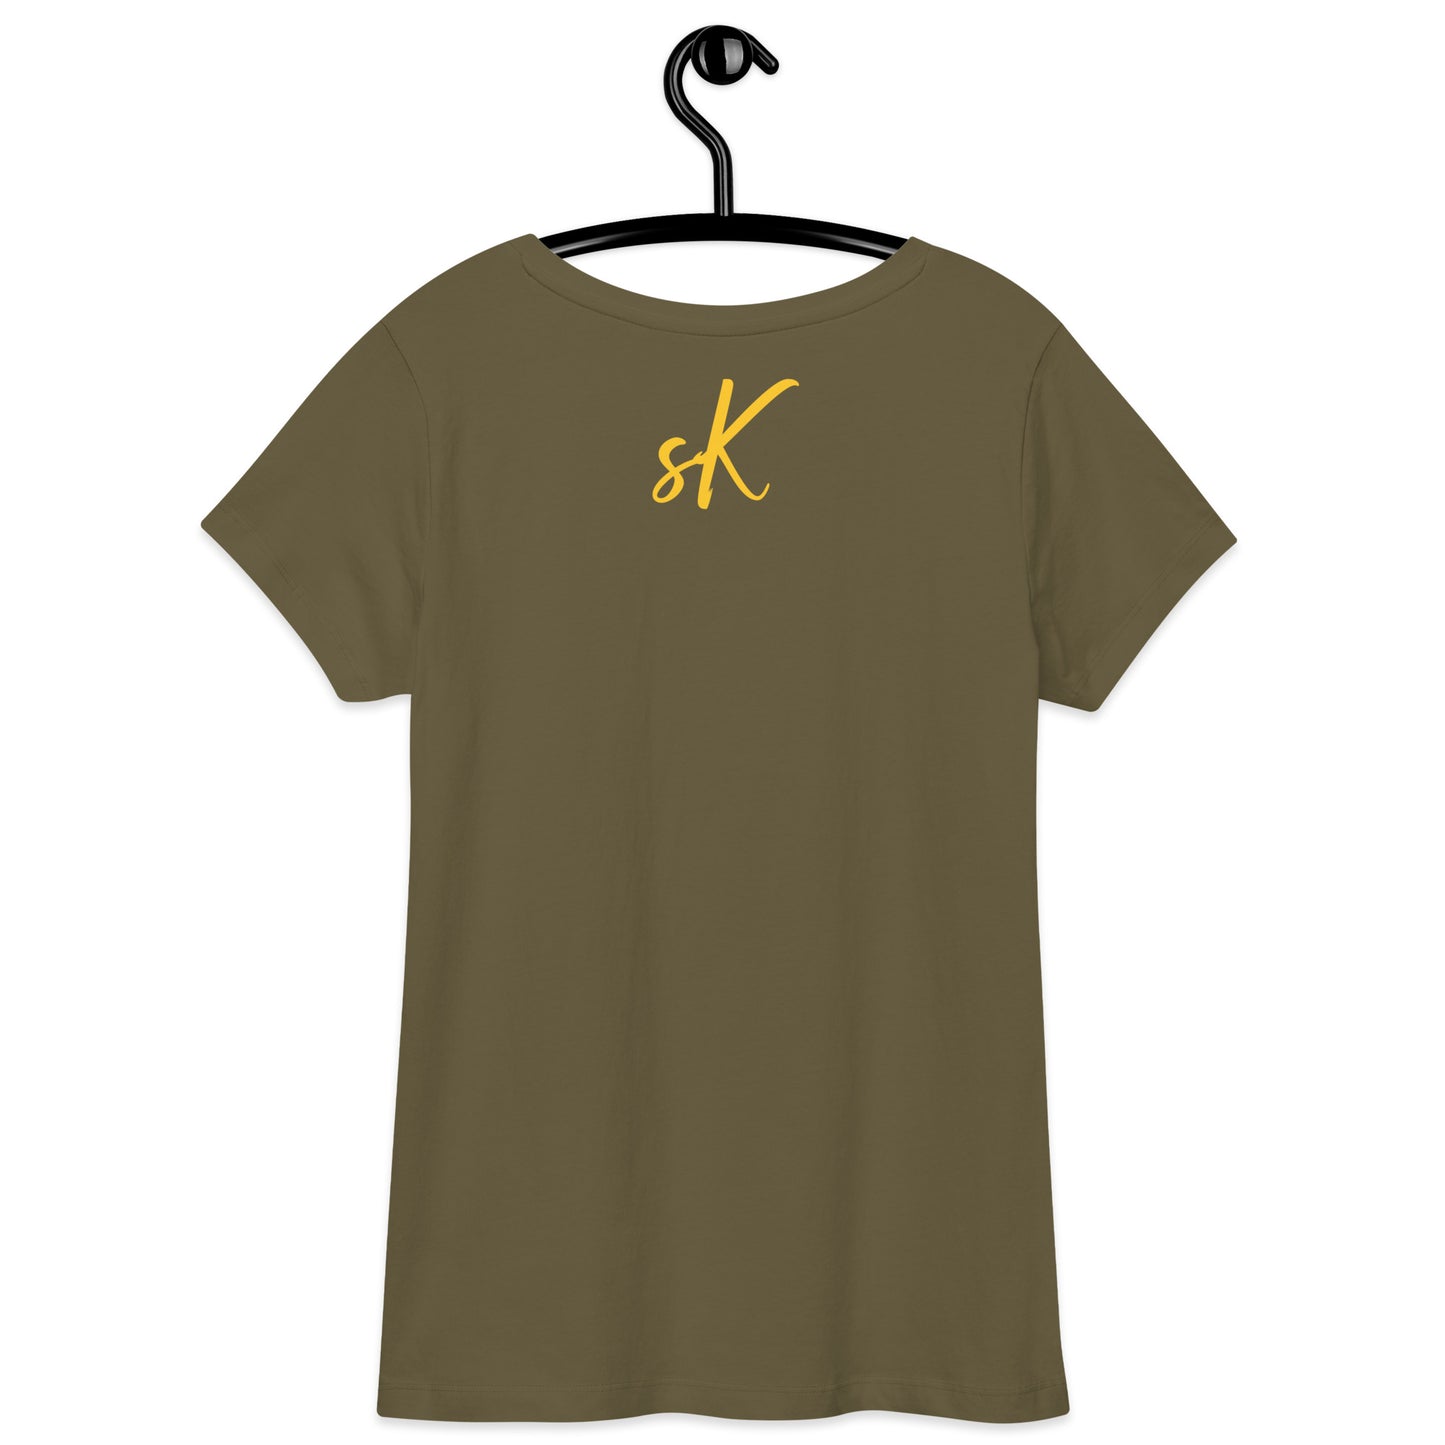 A. Gibson (Women’s fitted v-neck t-shirt)